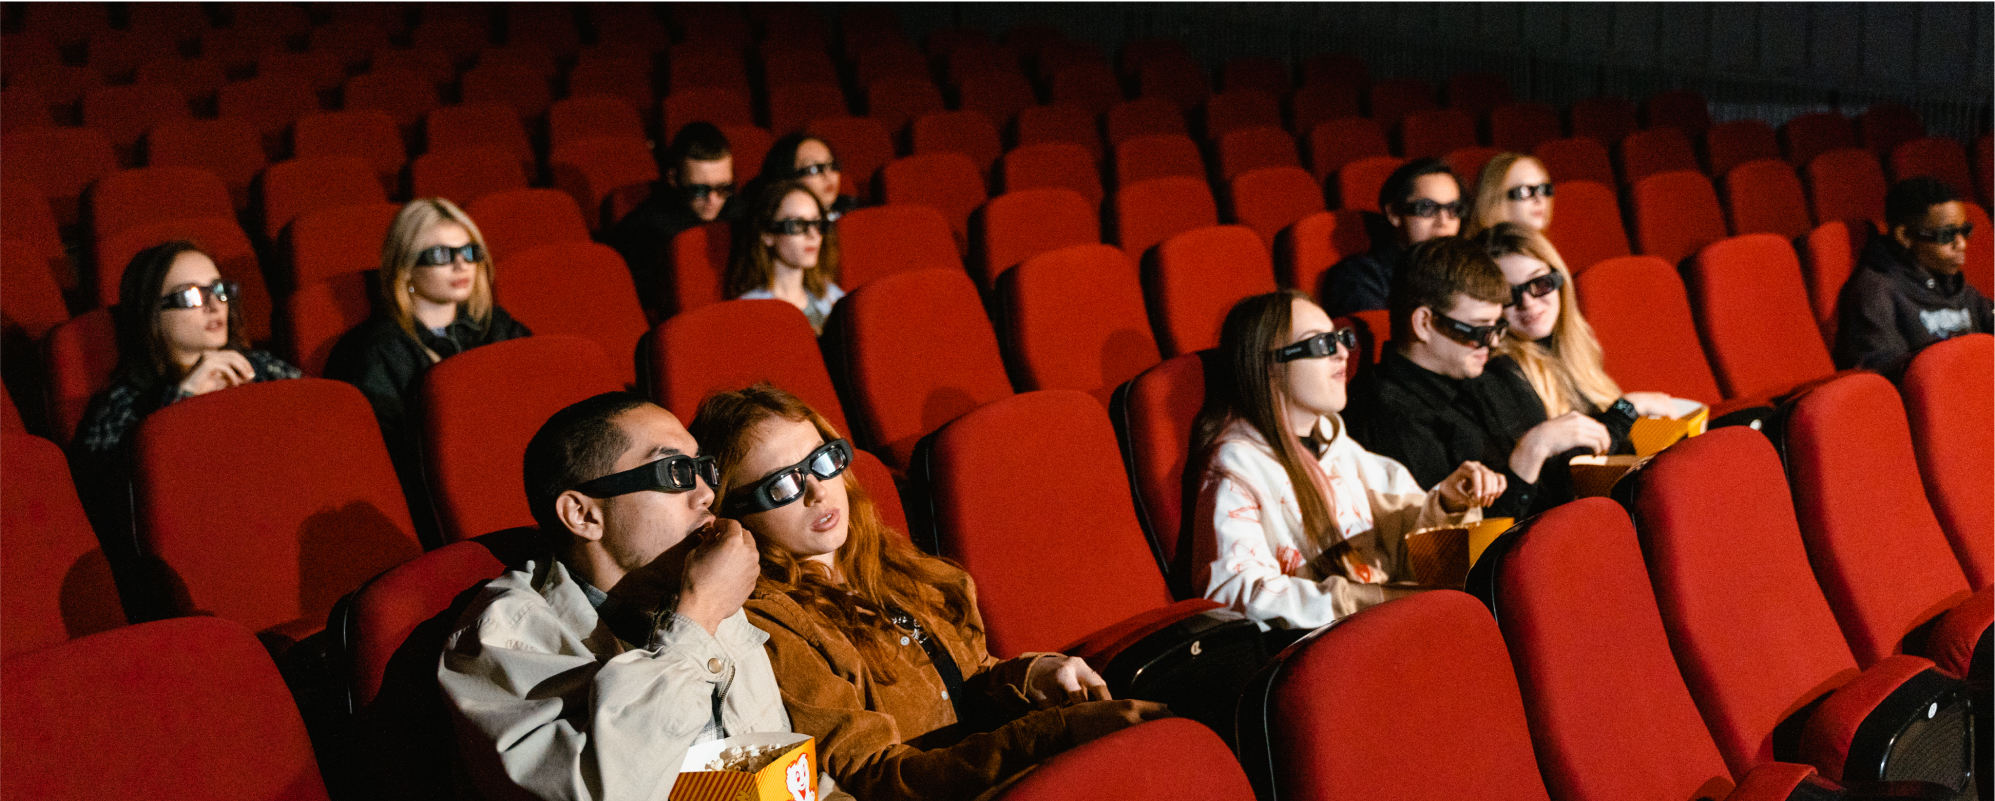 How to Take Your Cinema Chain to the Next Level with Marketing Automation Platforms